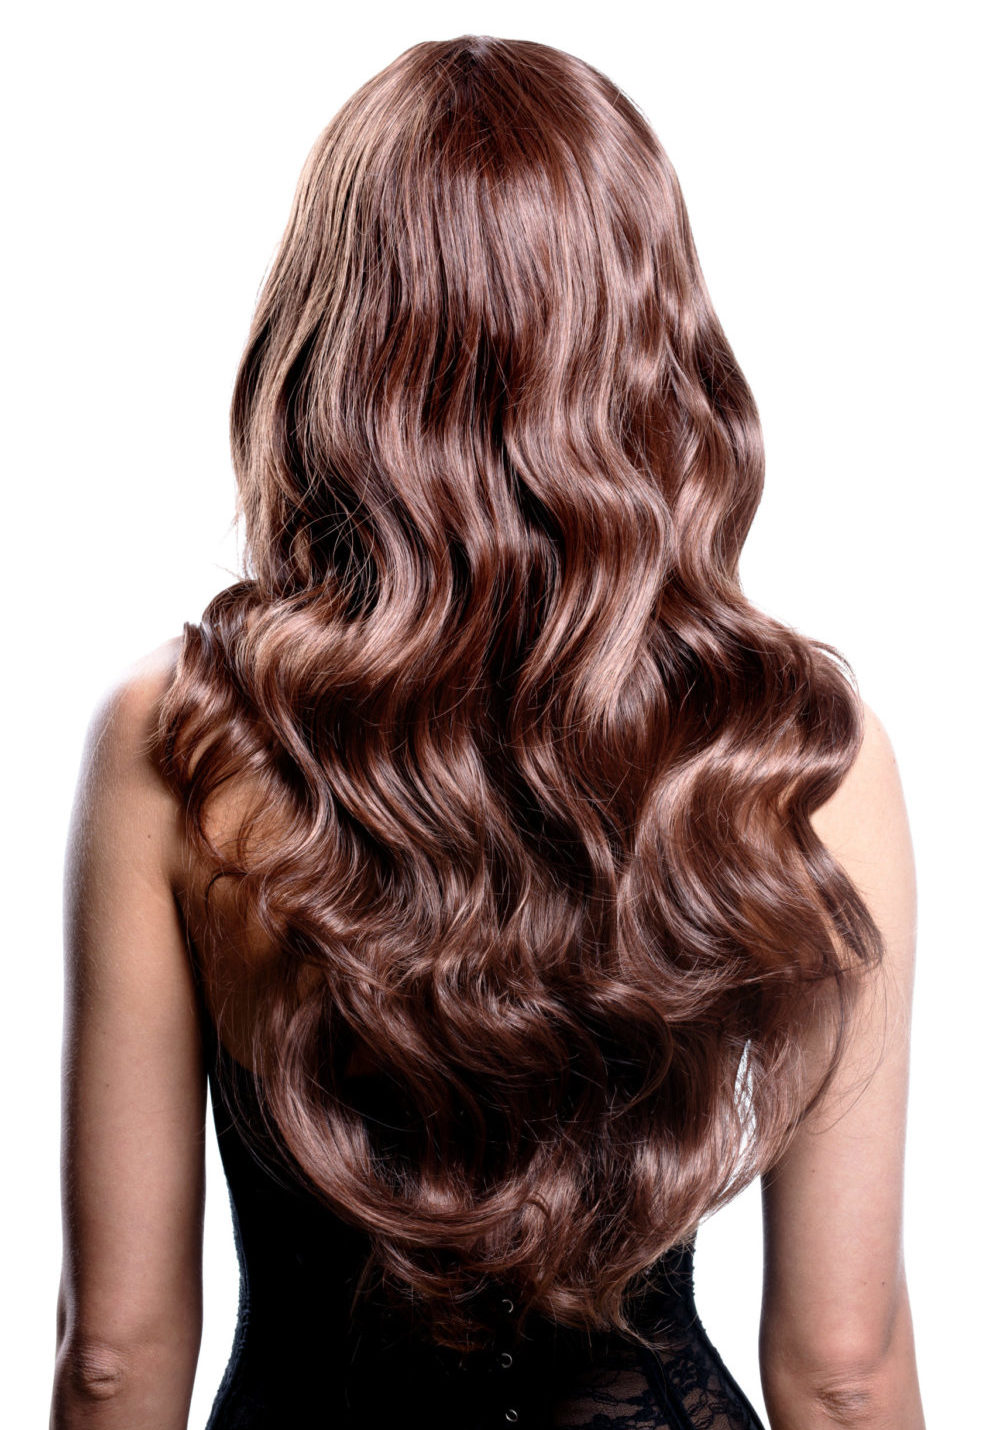 Brilliant Mahogany Red Brown Hair Color on a thin pale model in a studio